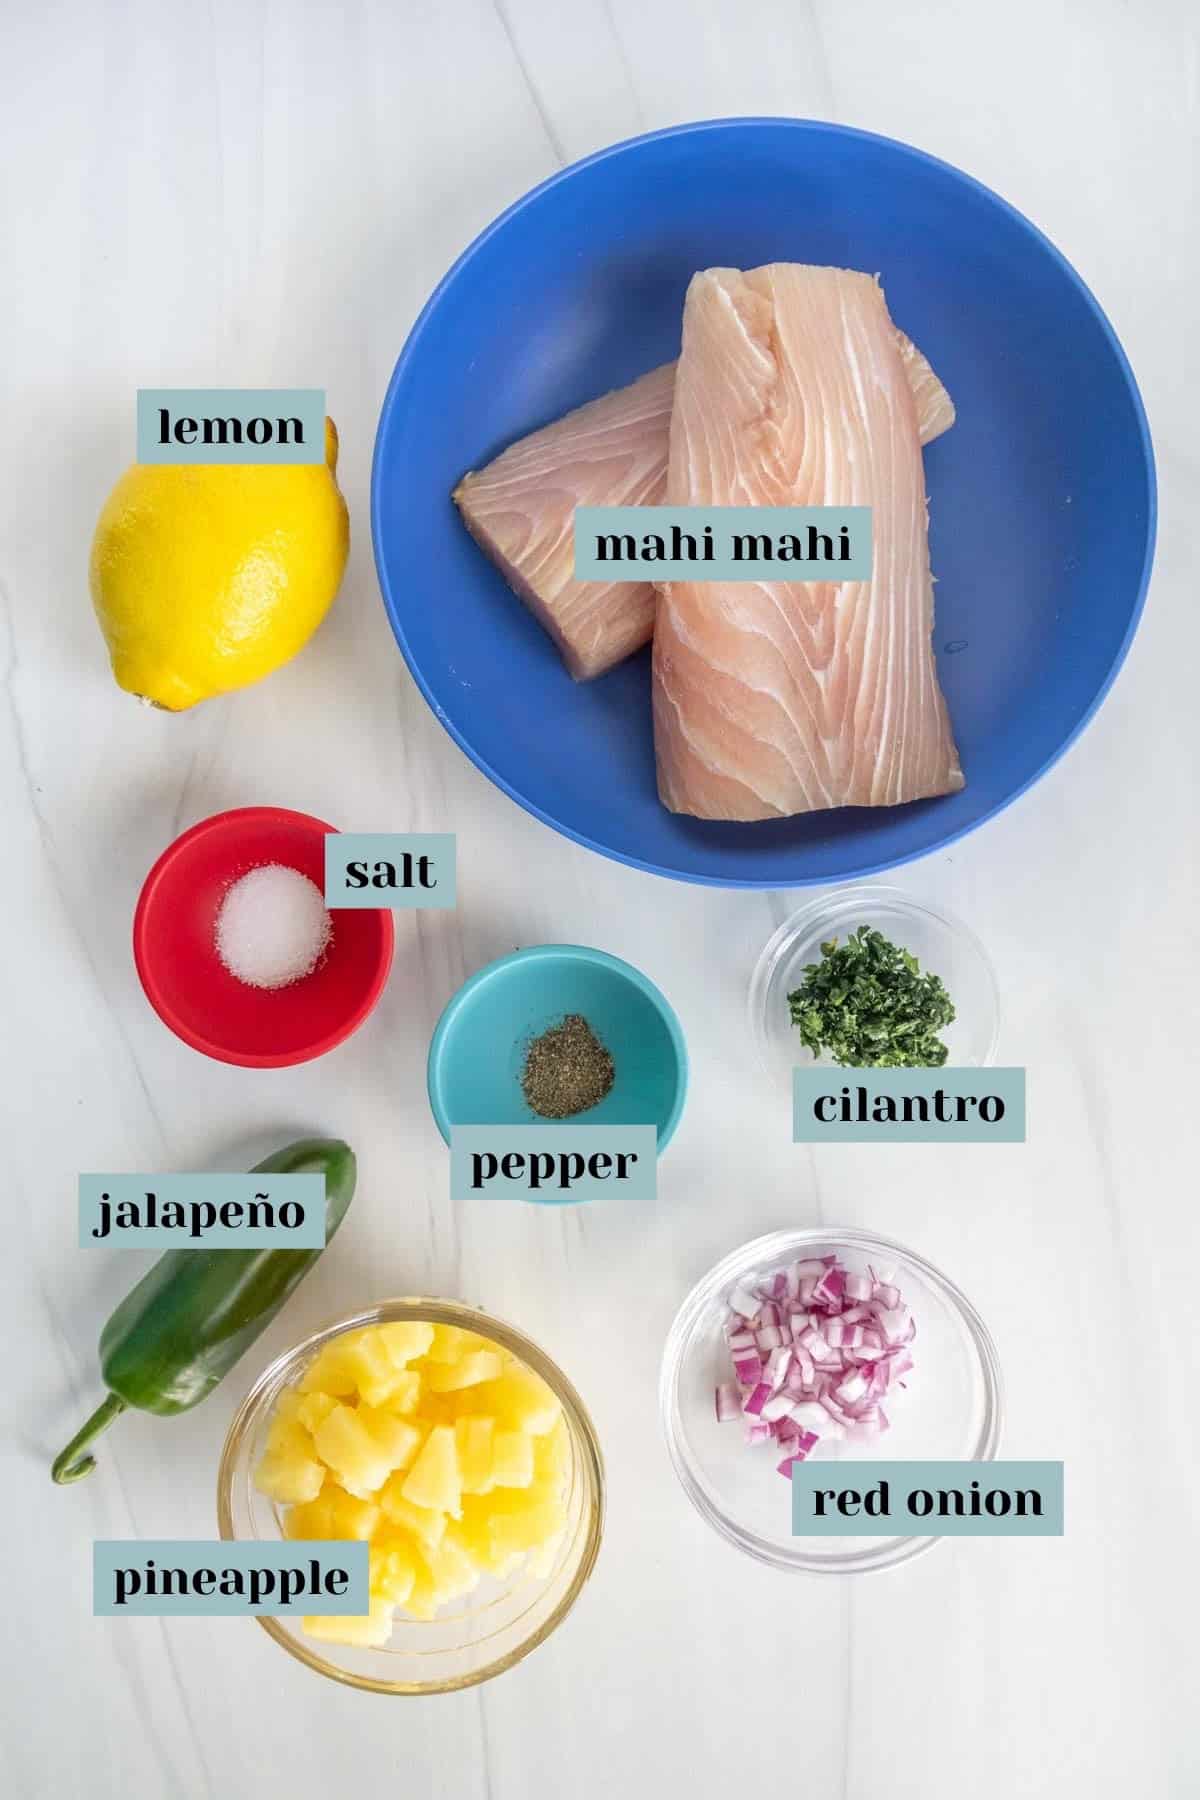 Ingredients for cooking spread on a table, including mahi mahi fillets in a blue bowl, and small bowls with lemon, salt, jalapeño, pineapple, cilantro, and red onion.